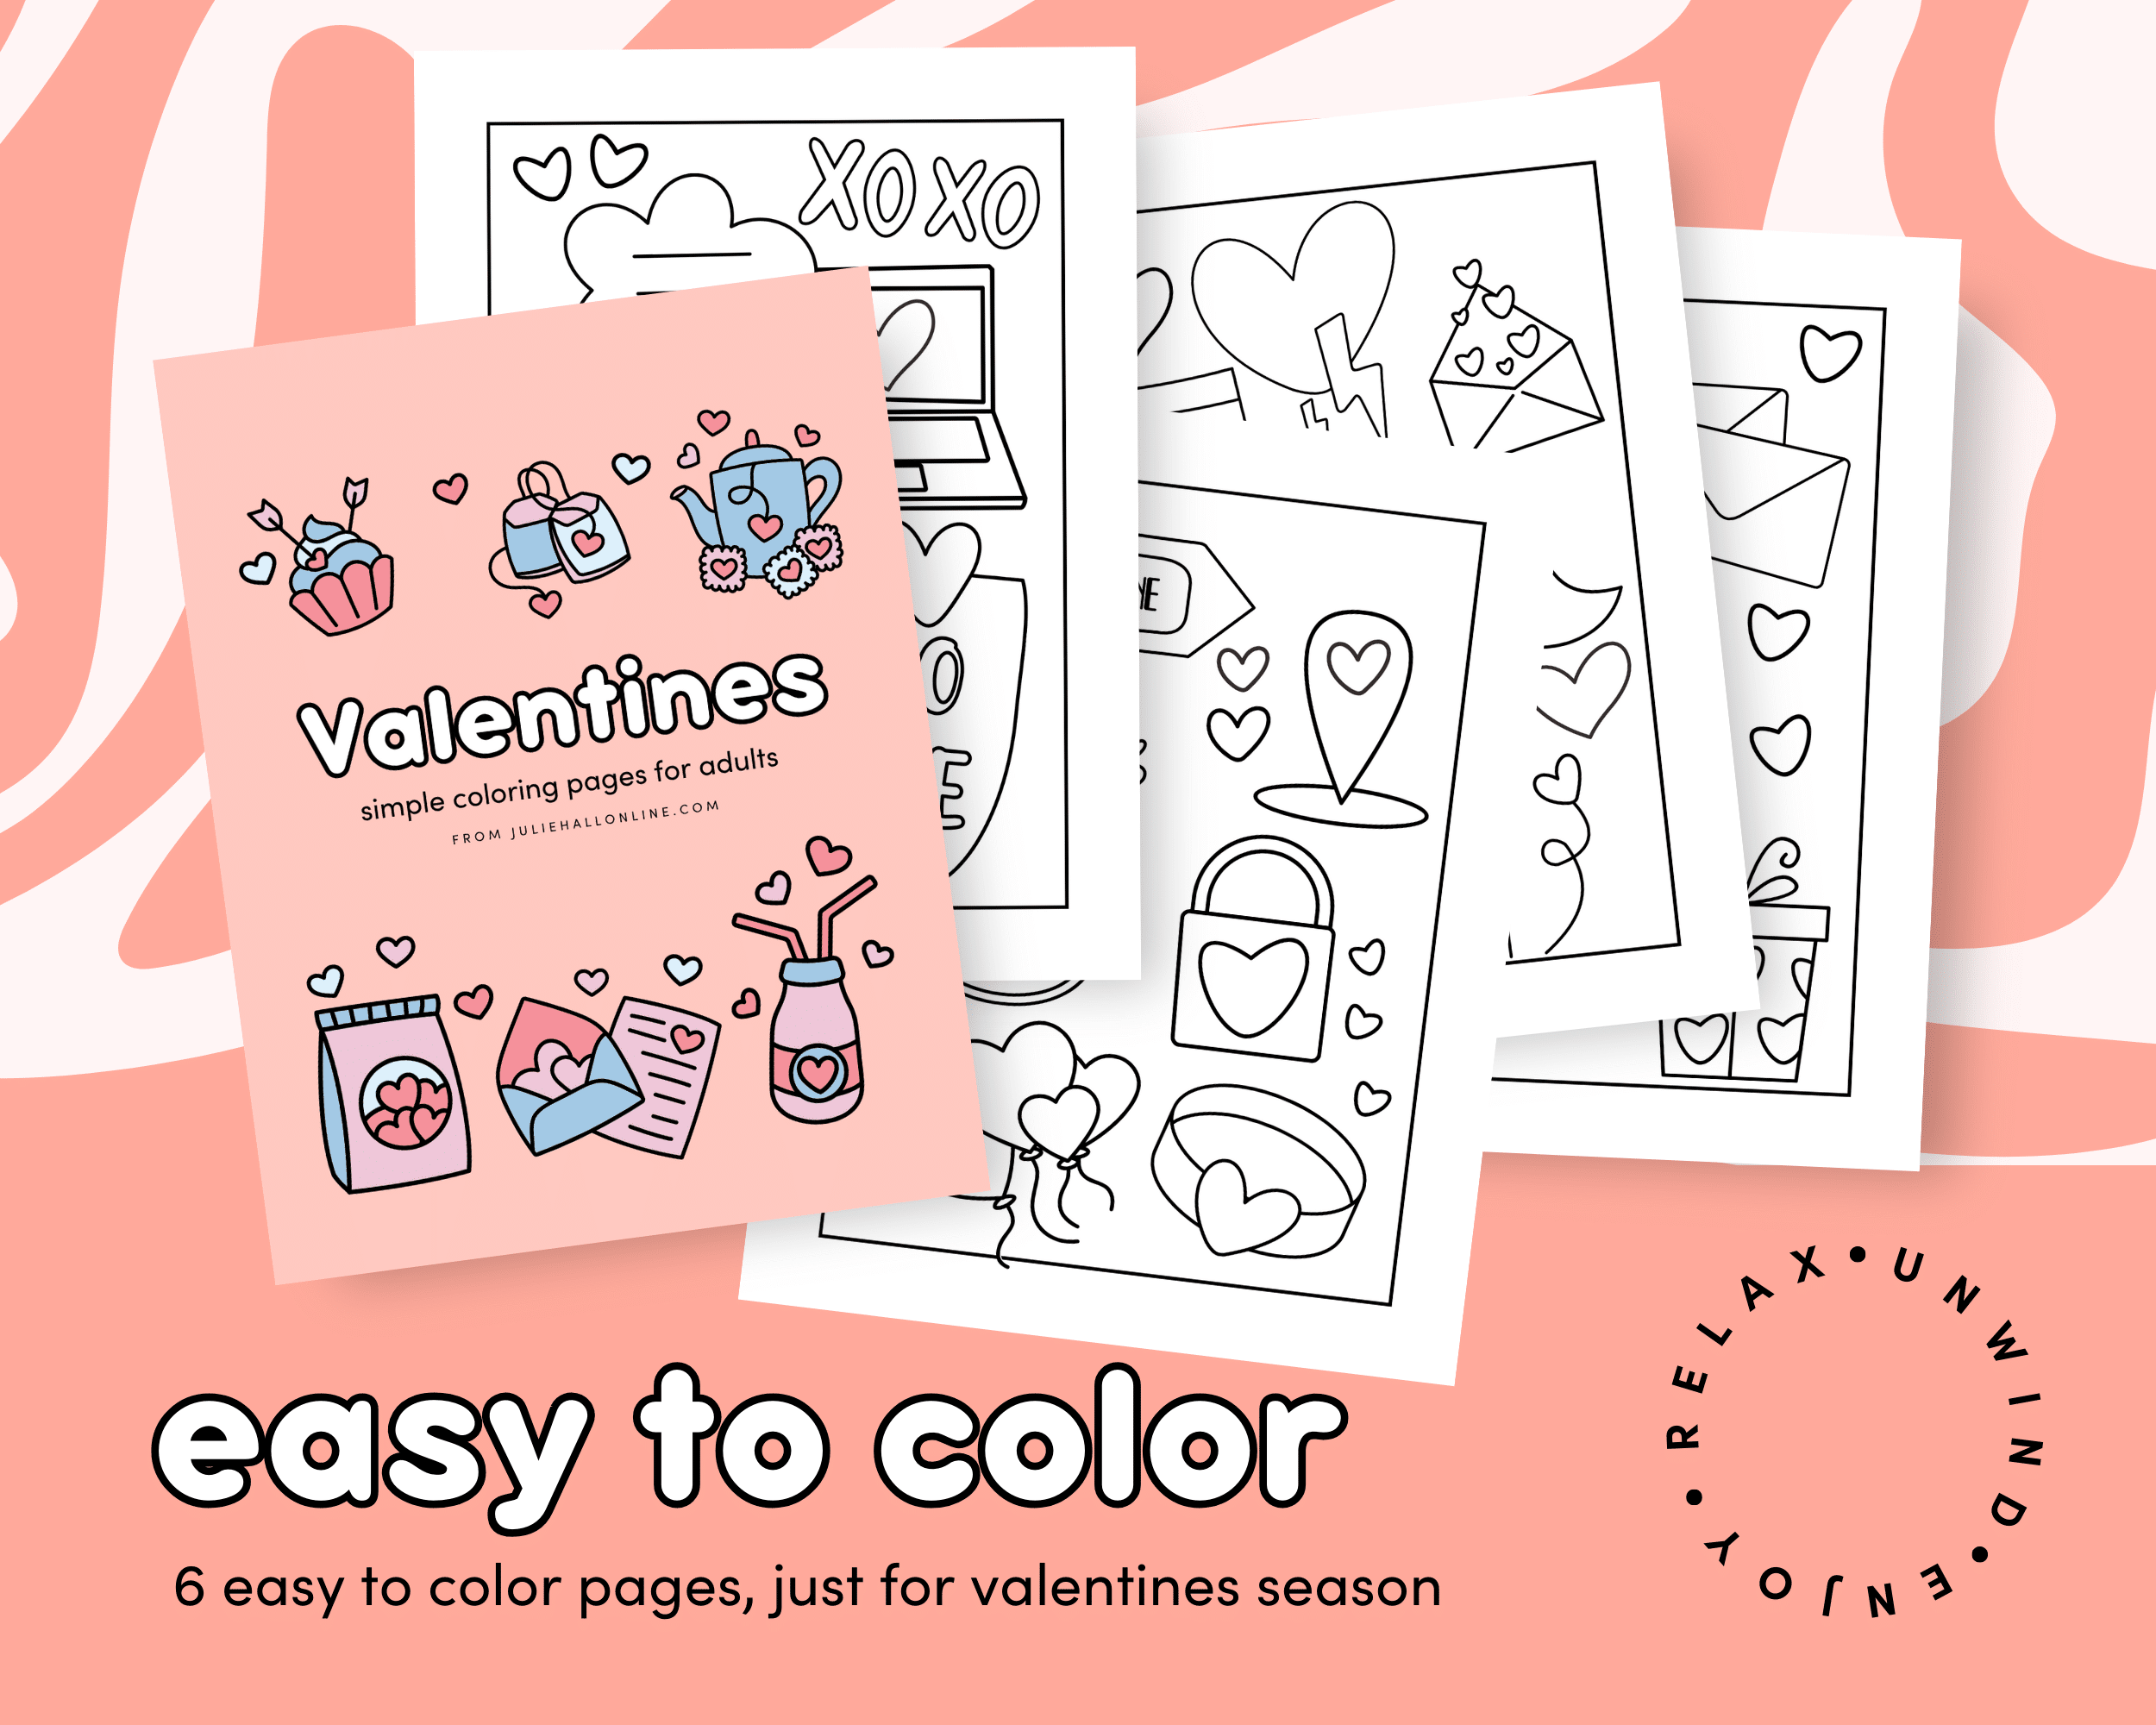 valentines day colouring pages<br />
